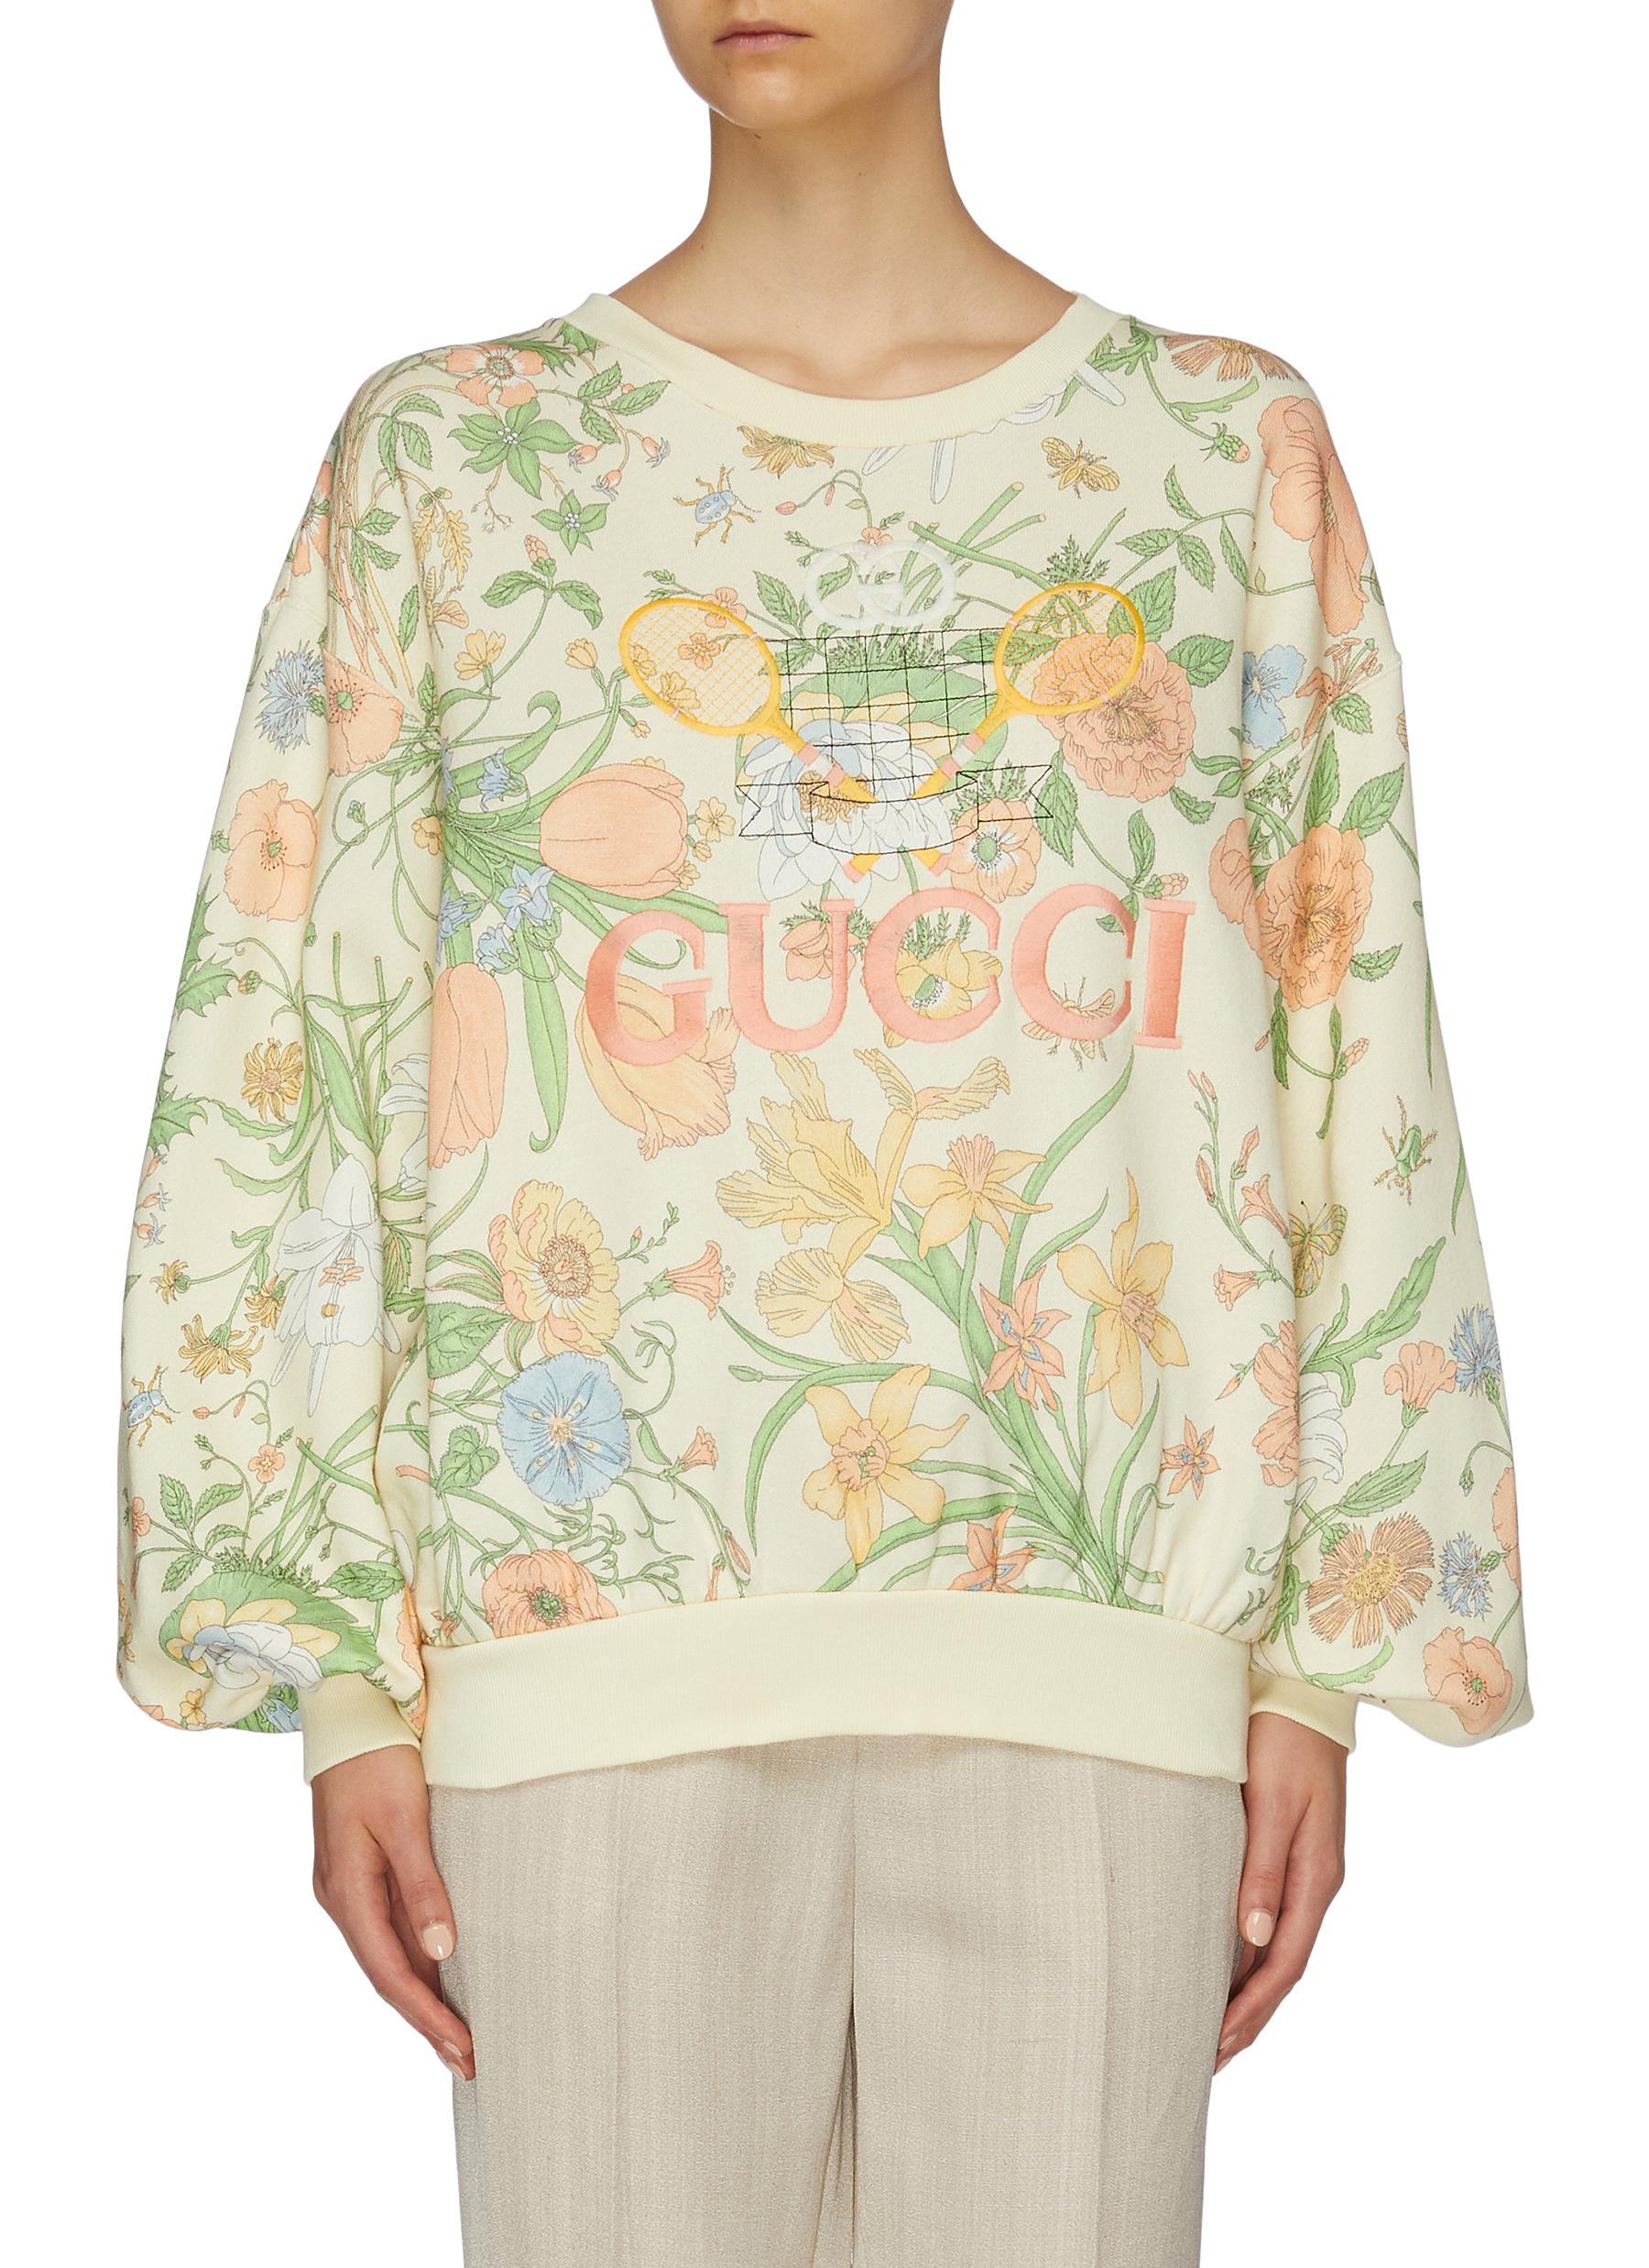 Gucci Tennis' embroidered floral print 